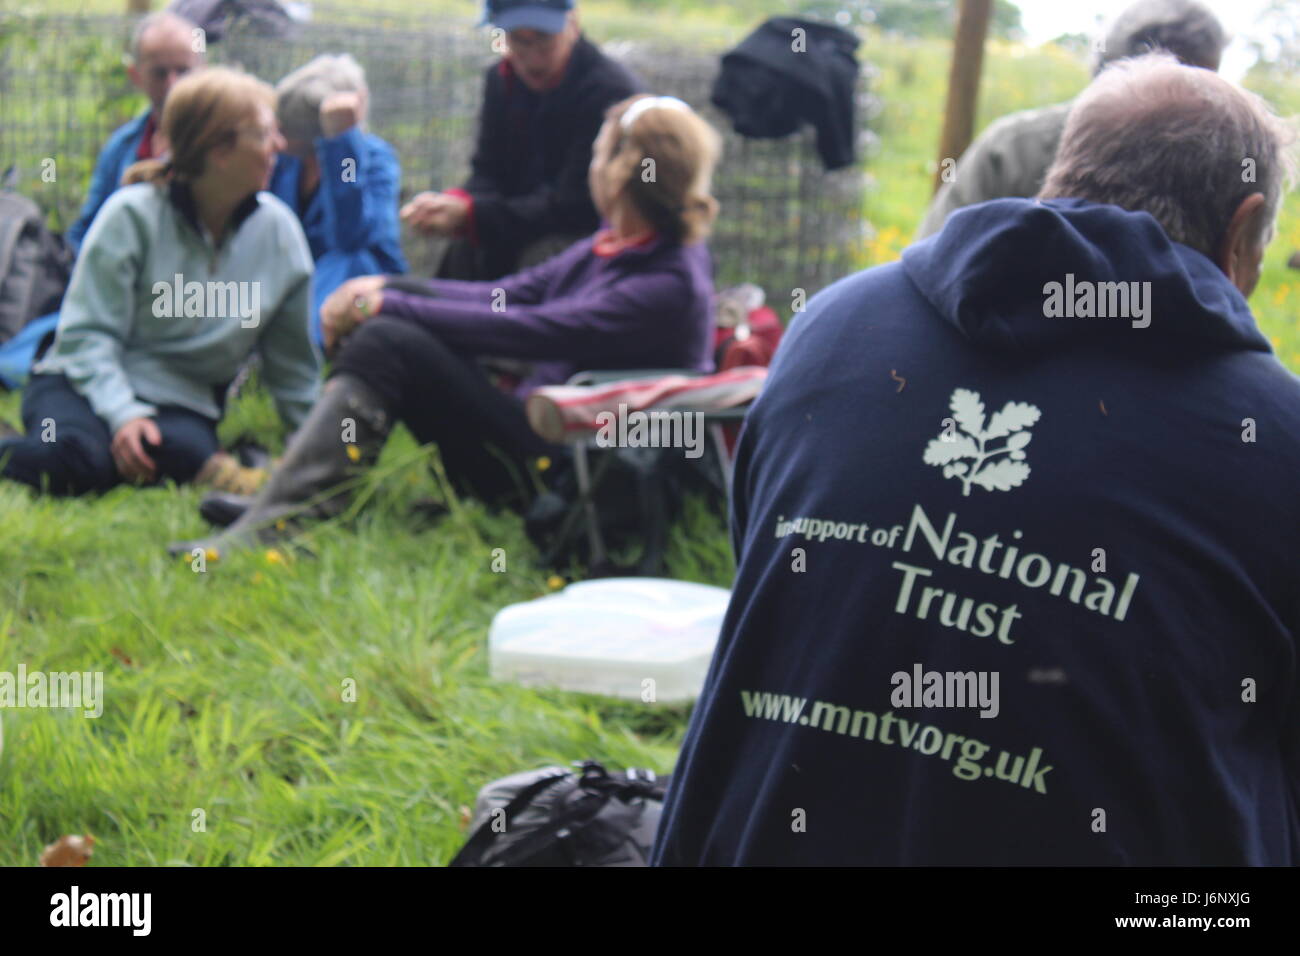 Group of volunteers for Manchester National Trust resting, with man wearing blue sweatshirt advertising the group in the foreground Stock Photo